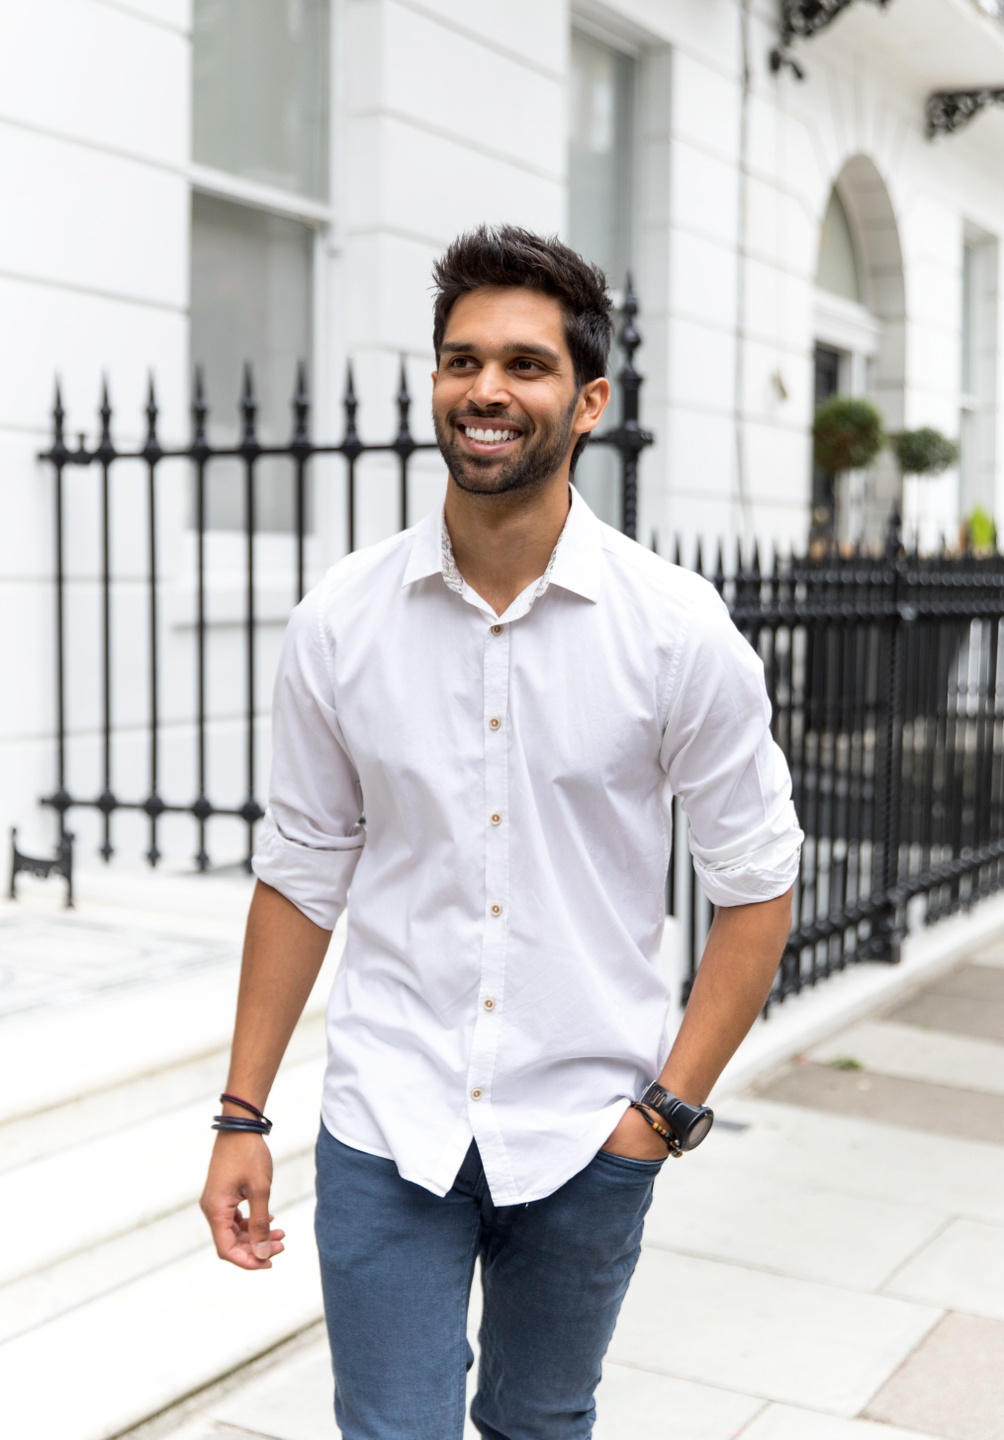 Learn about Sahil Patel, founder of Restorative Interface and accomplished cosmetic dentist. Discover his education, accolades, and commitment to dental excellence.